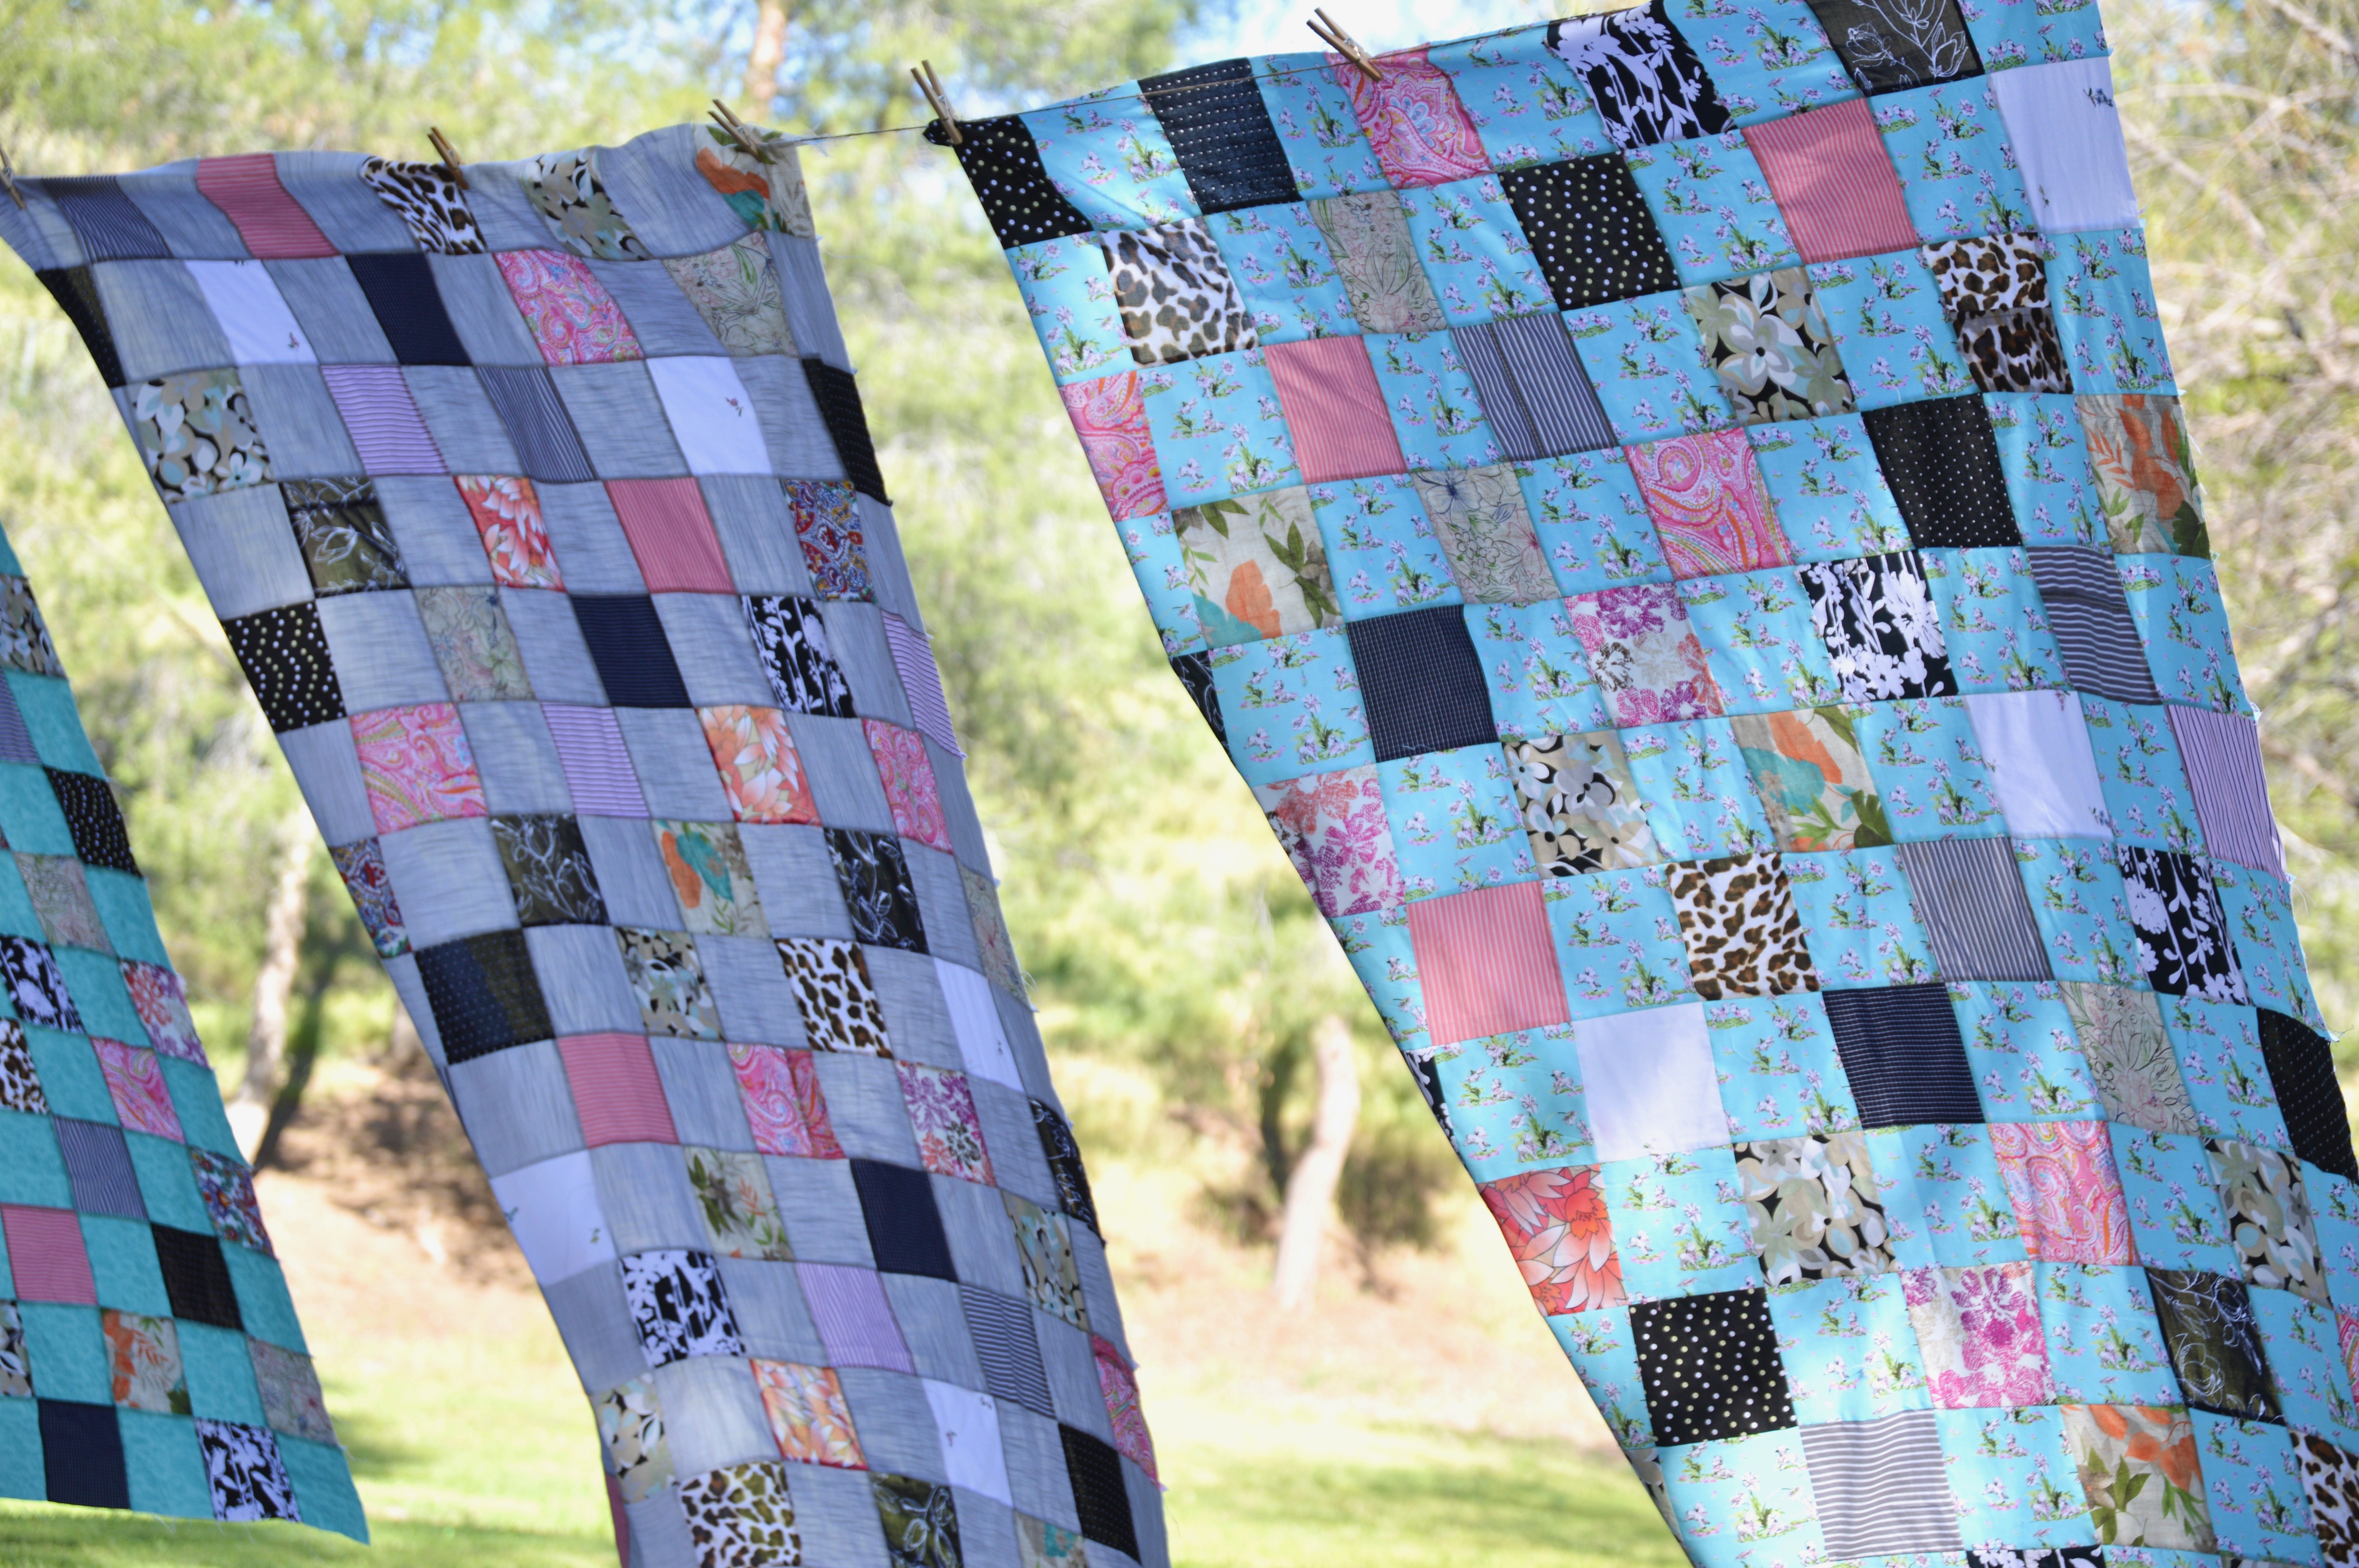 A Tribute to My Nana and Memory Quilts in Her Rememberance